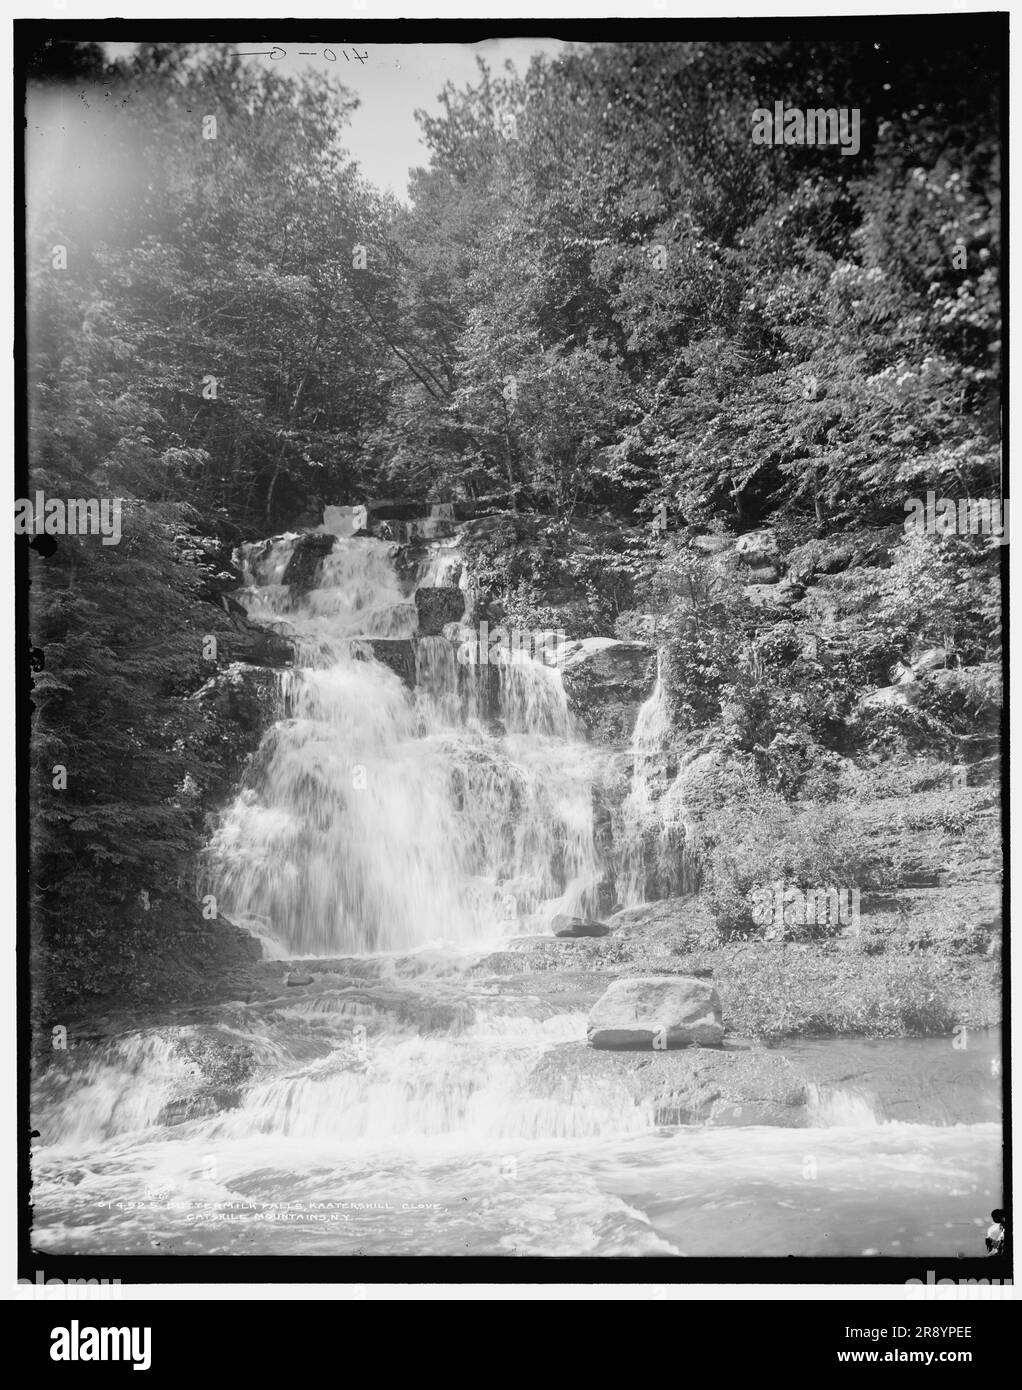 Buttermilk Falls, Kaaterskill Clove, Catskill Mountains, N.Y., (1902?). Stock Photo